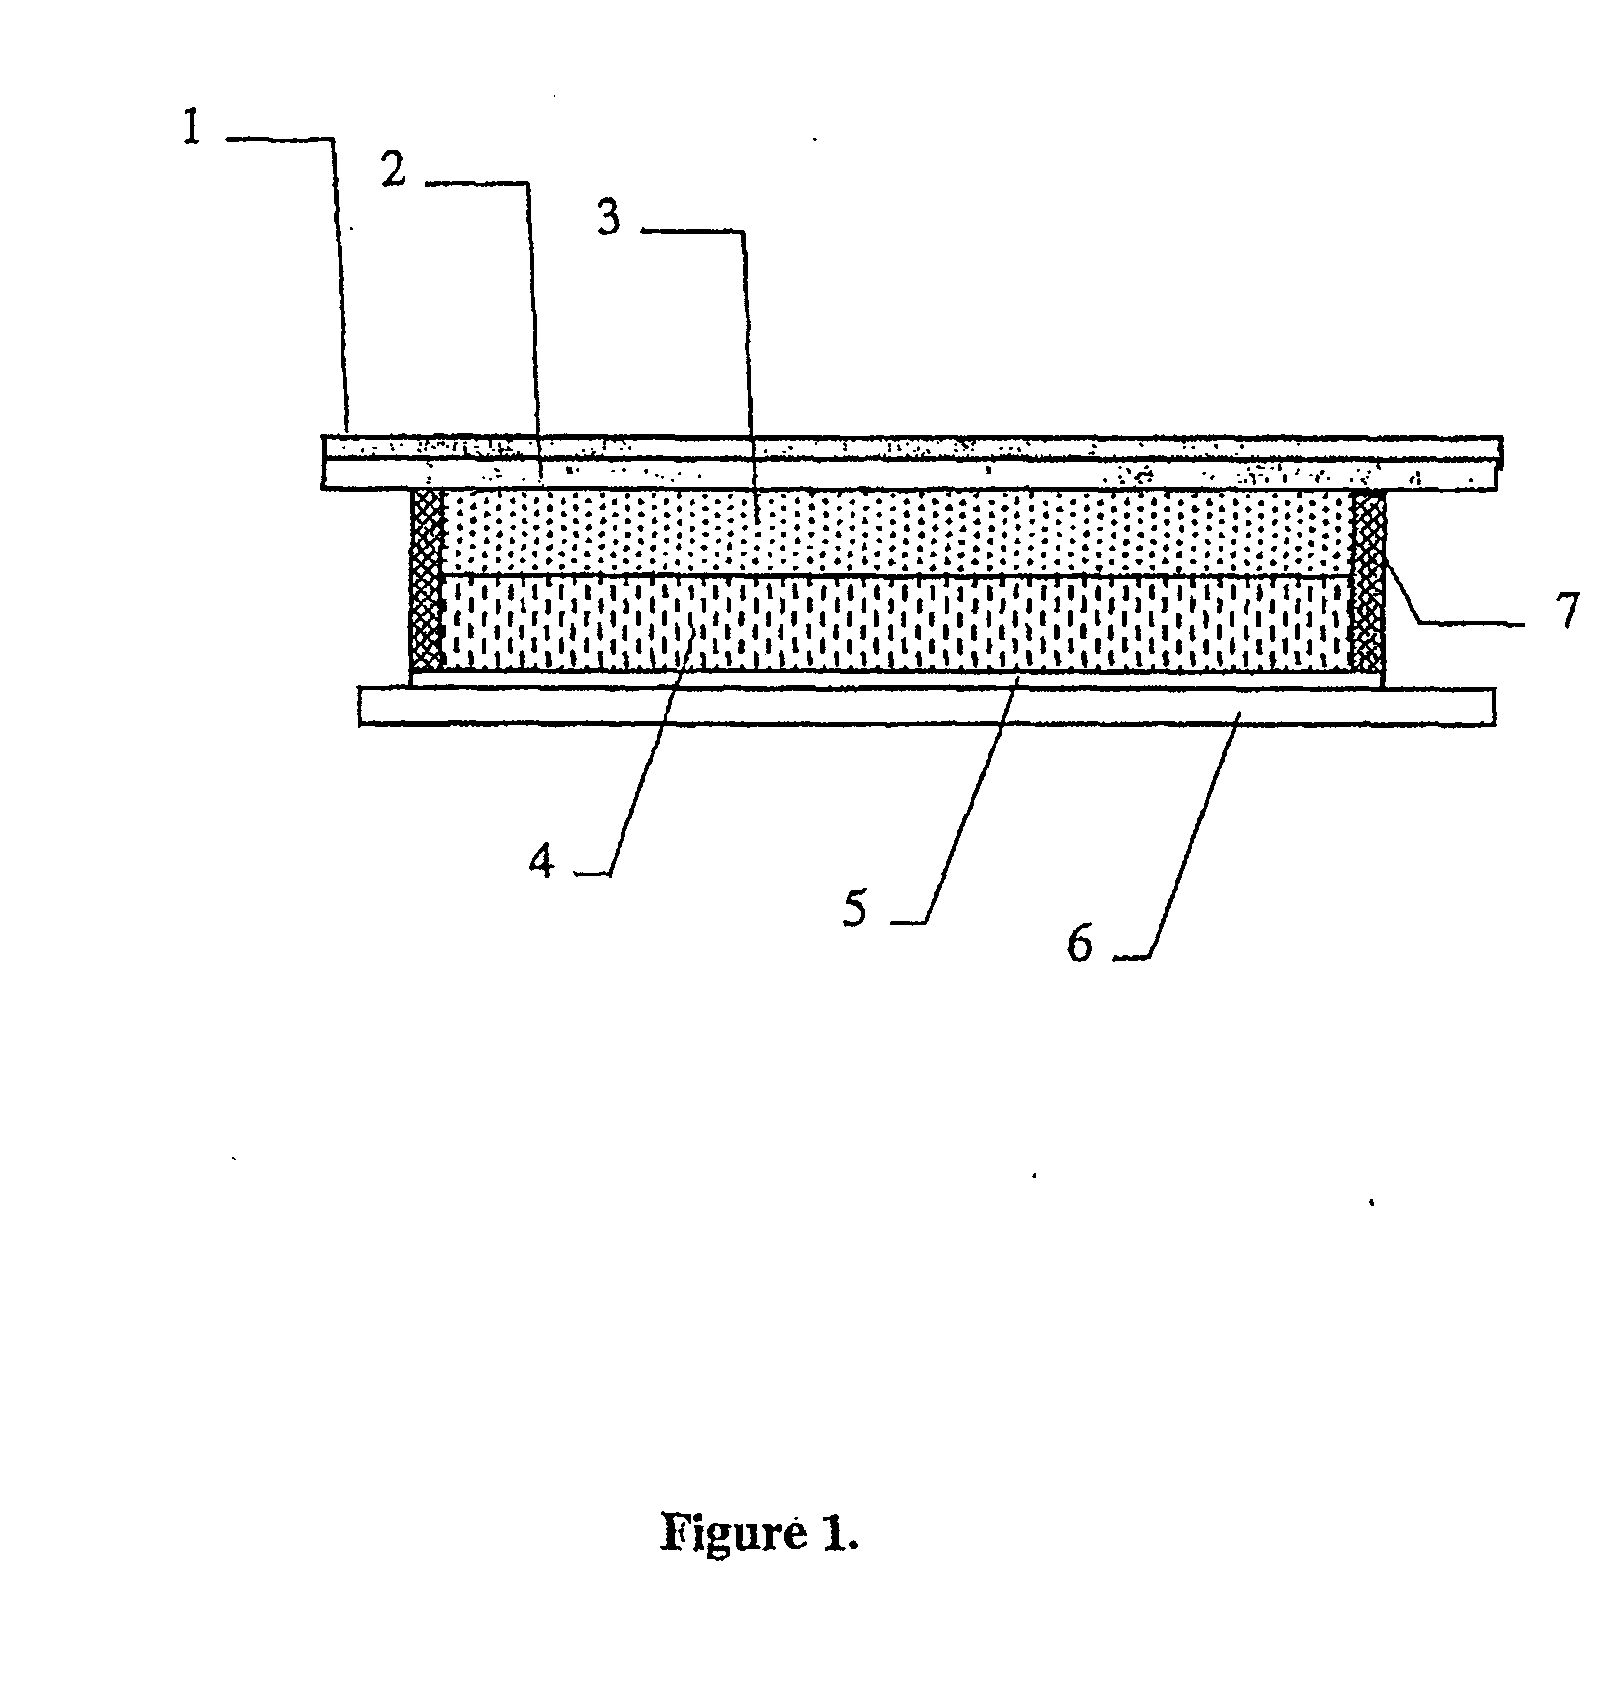 Photoelectrochemical device